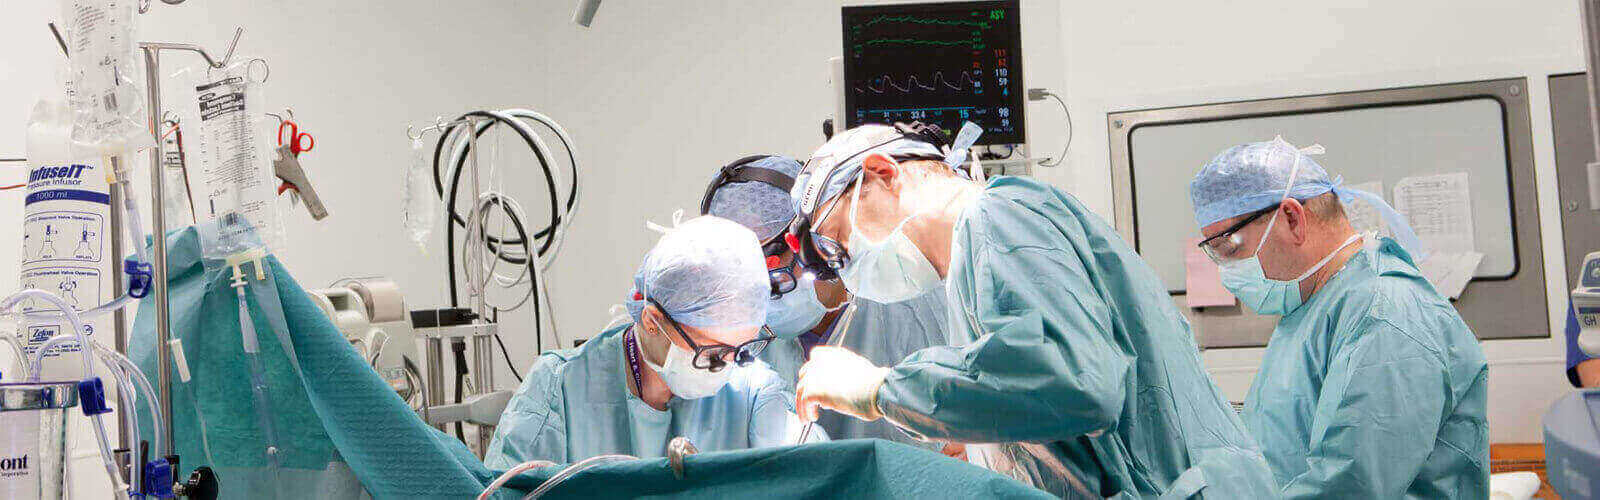 Heart Surgery Or Cardiac Surgery in United States